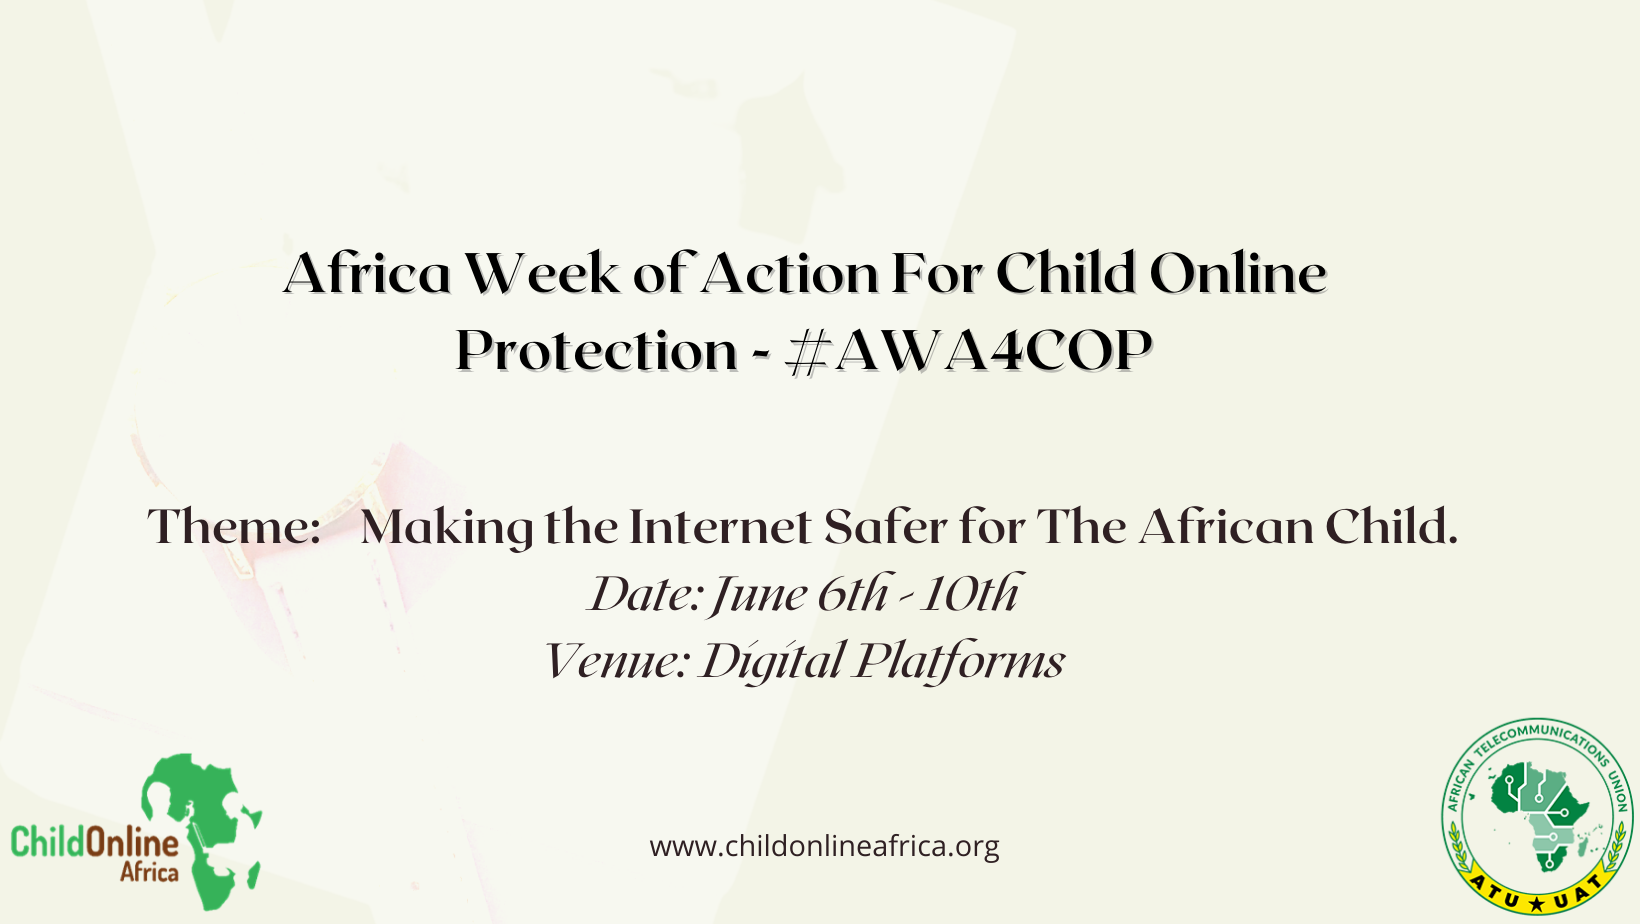 Making the Internet Safer for The African Child – Africa Week of Action For COP (#AWA4COP)